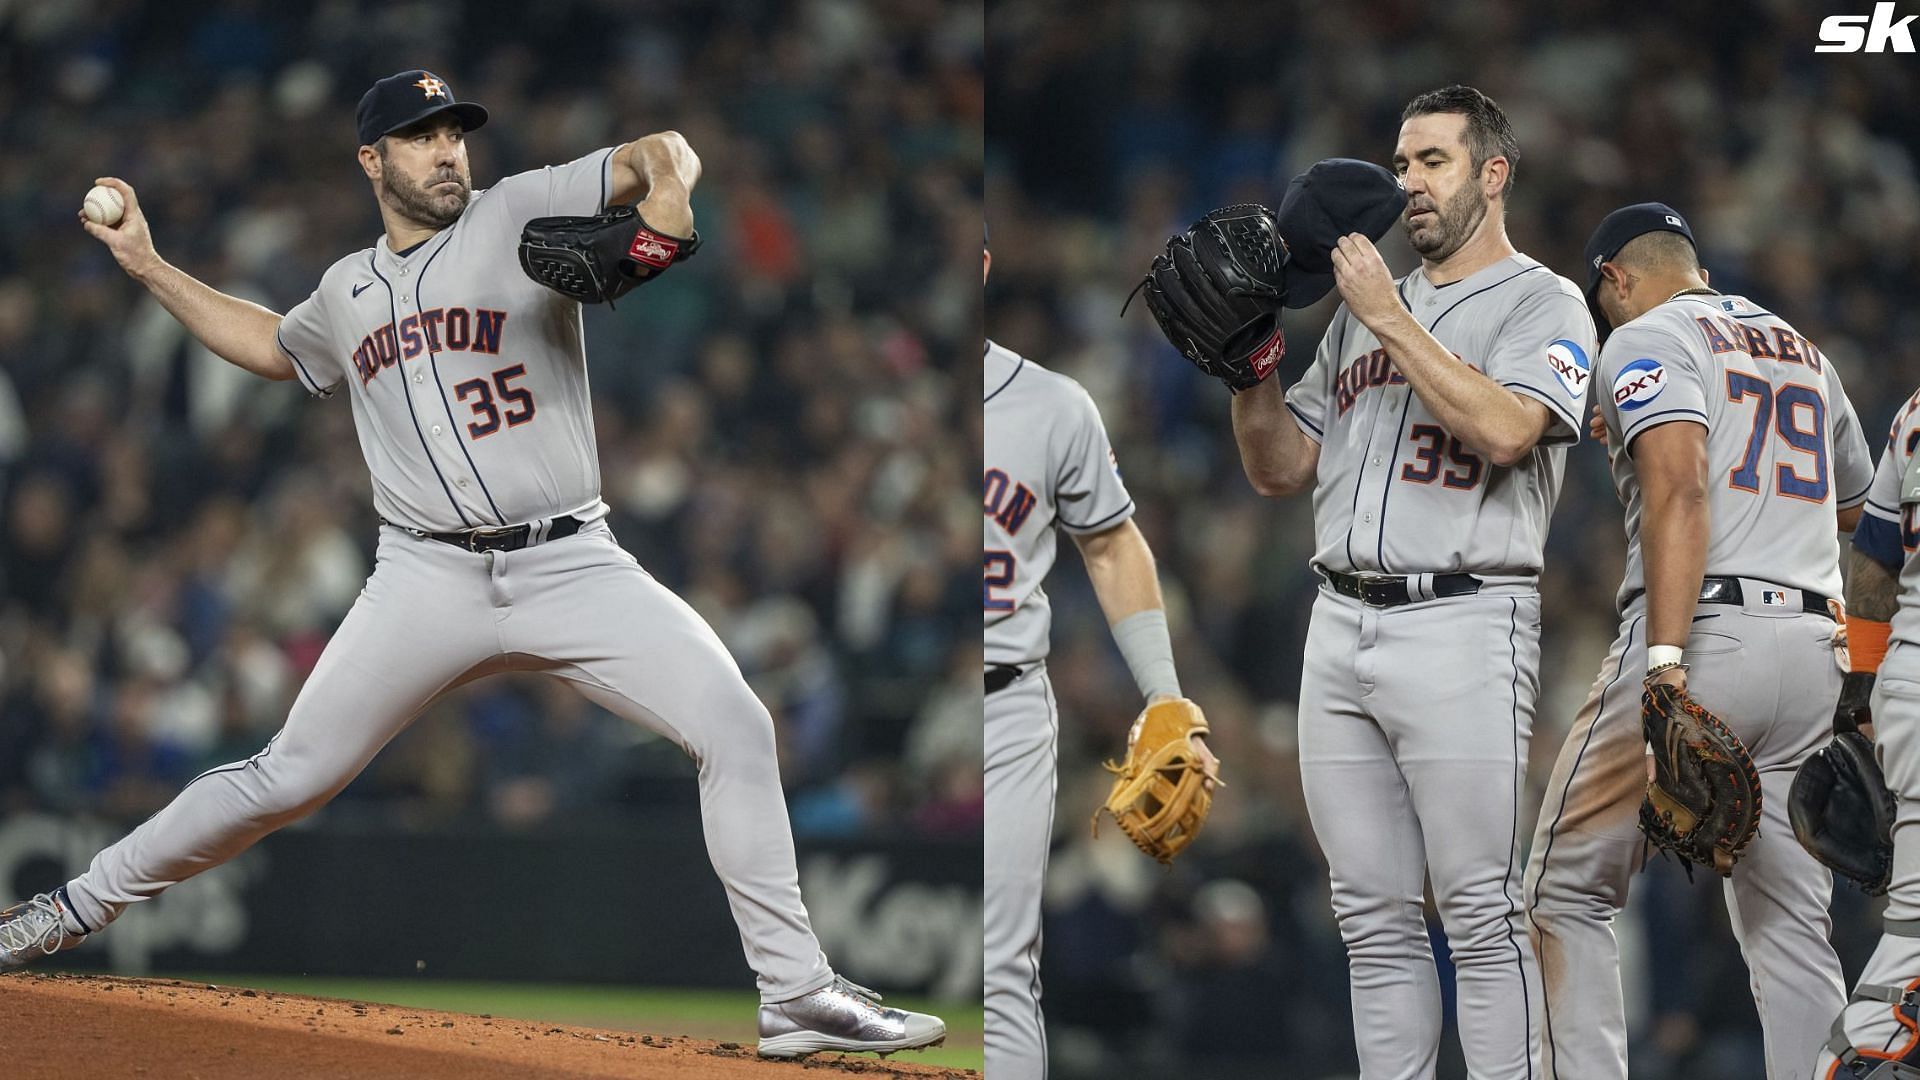 Houston Astros starter Justin Verlander delivers a pitch during the first inning against the Seattle Mariners